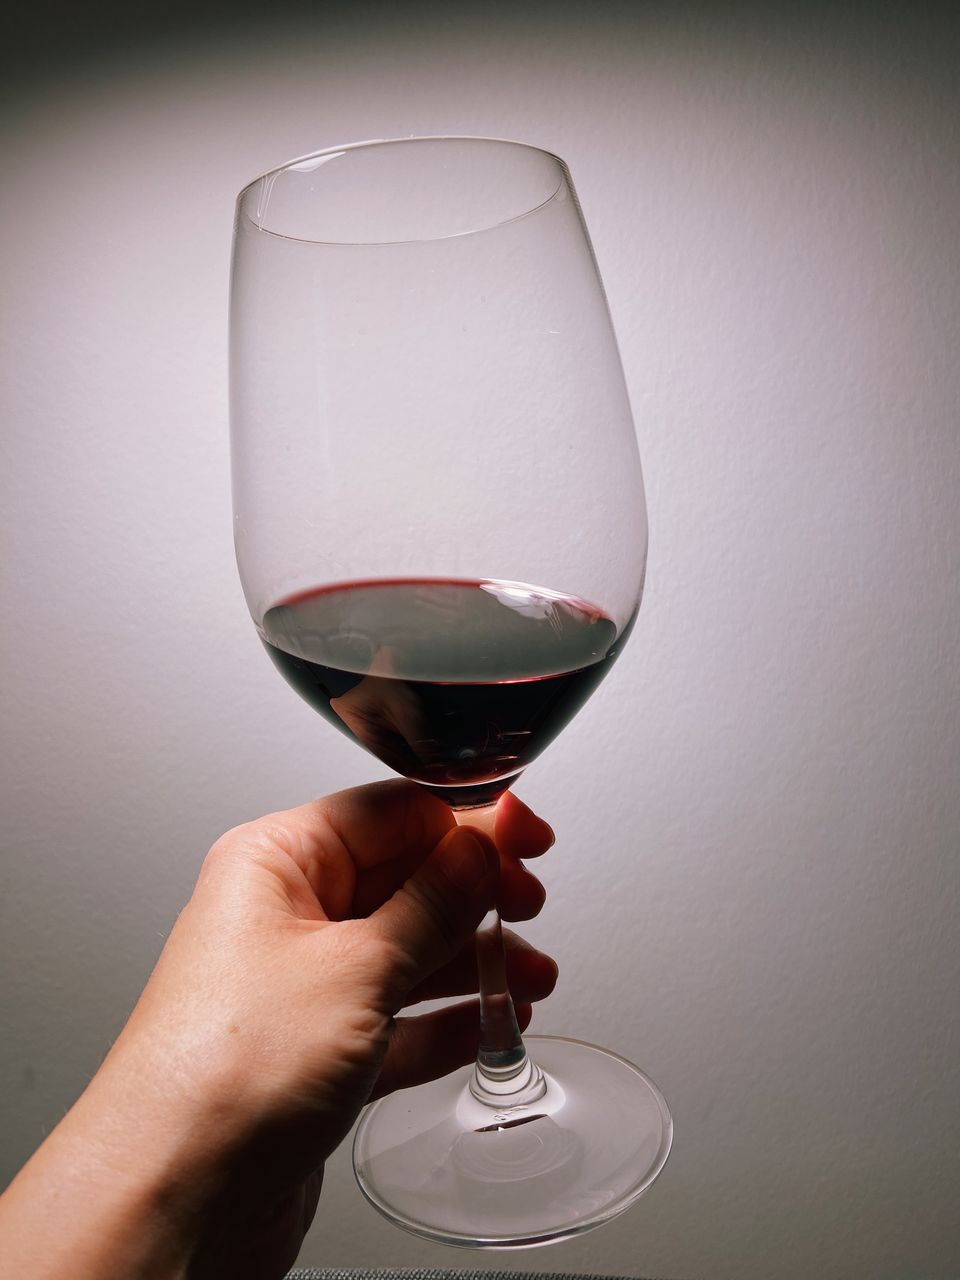 CLOSE-UP OF HAND HOLDING GLASS OF WINE